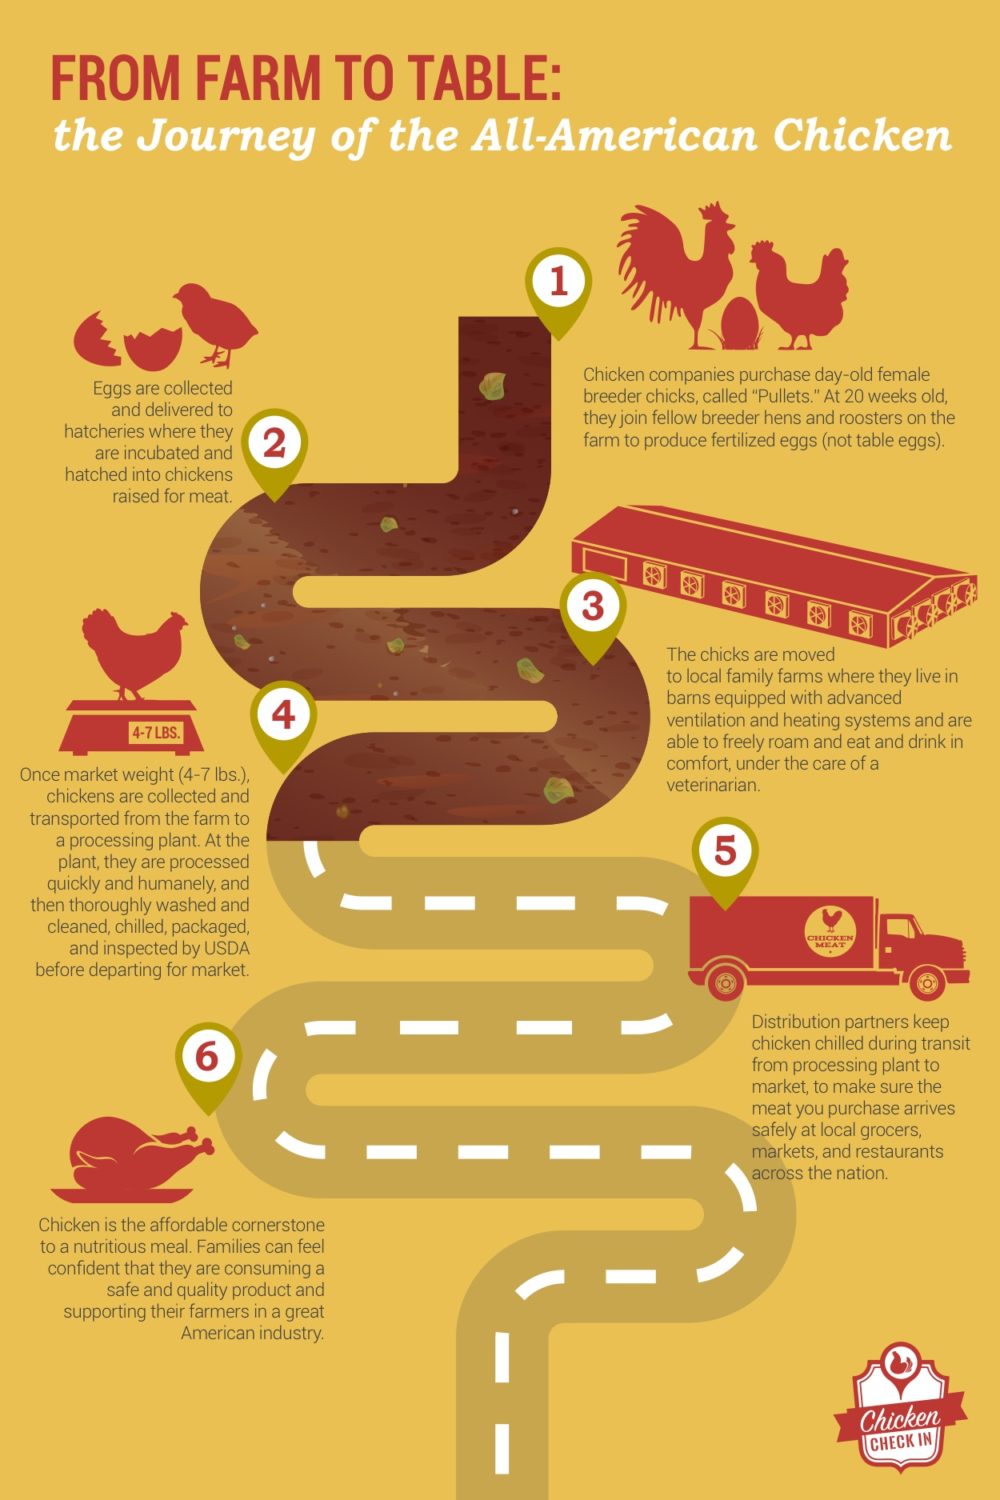 Follow chicken’s journey from farm to table [infographic]